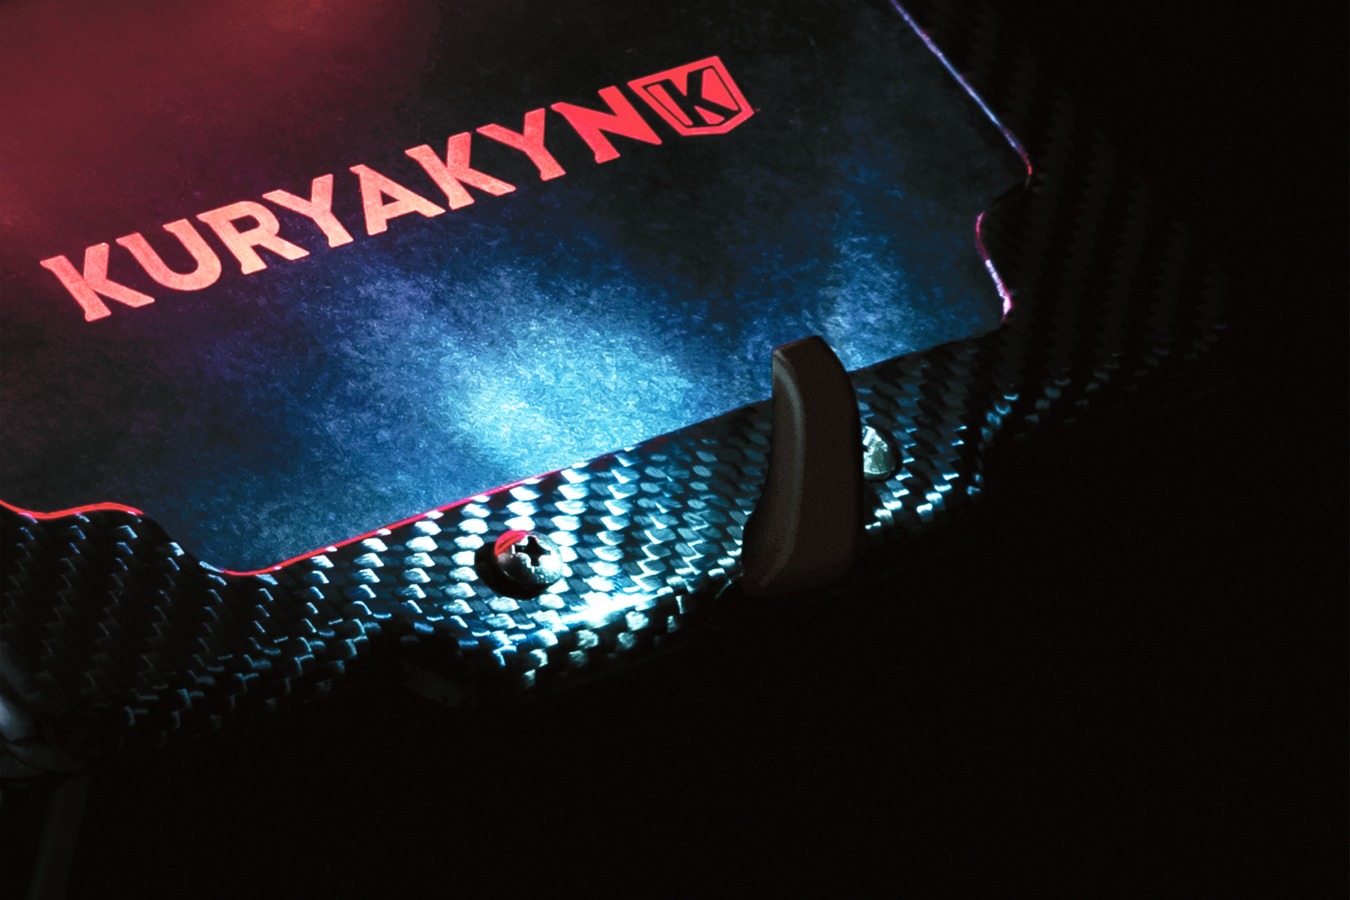 A view of a part highlighted in dramatic lighting, sporting the Kuryakyn brand name. 